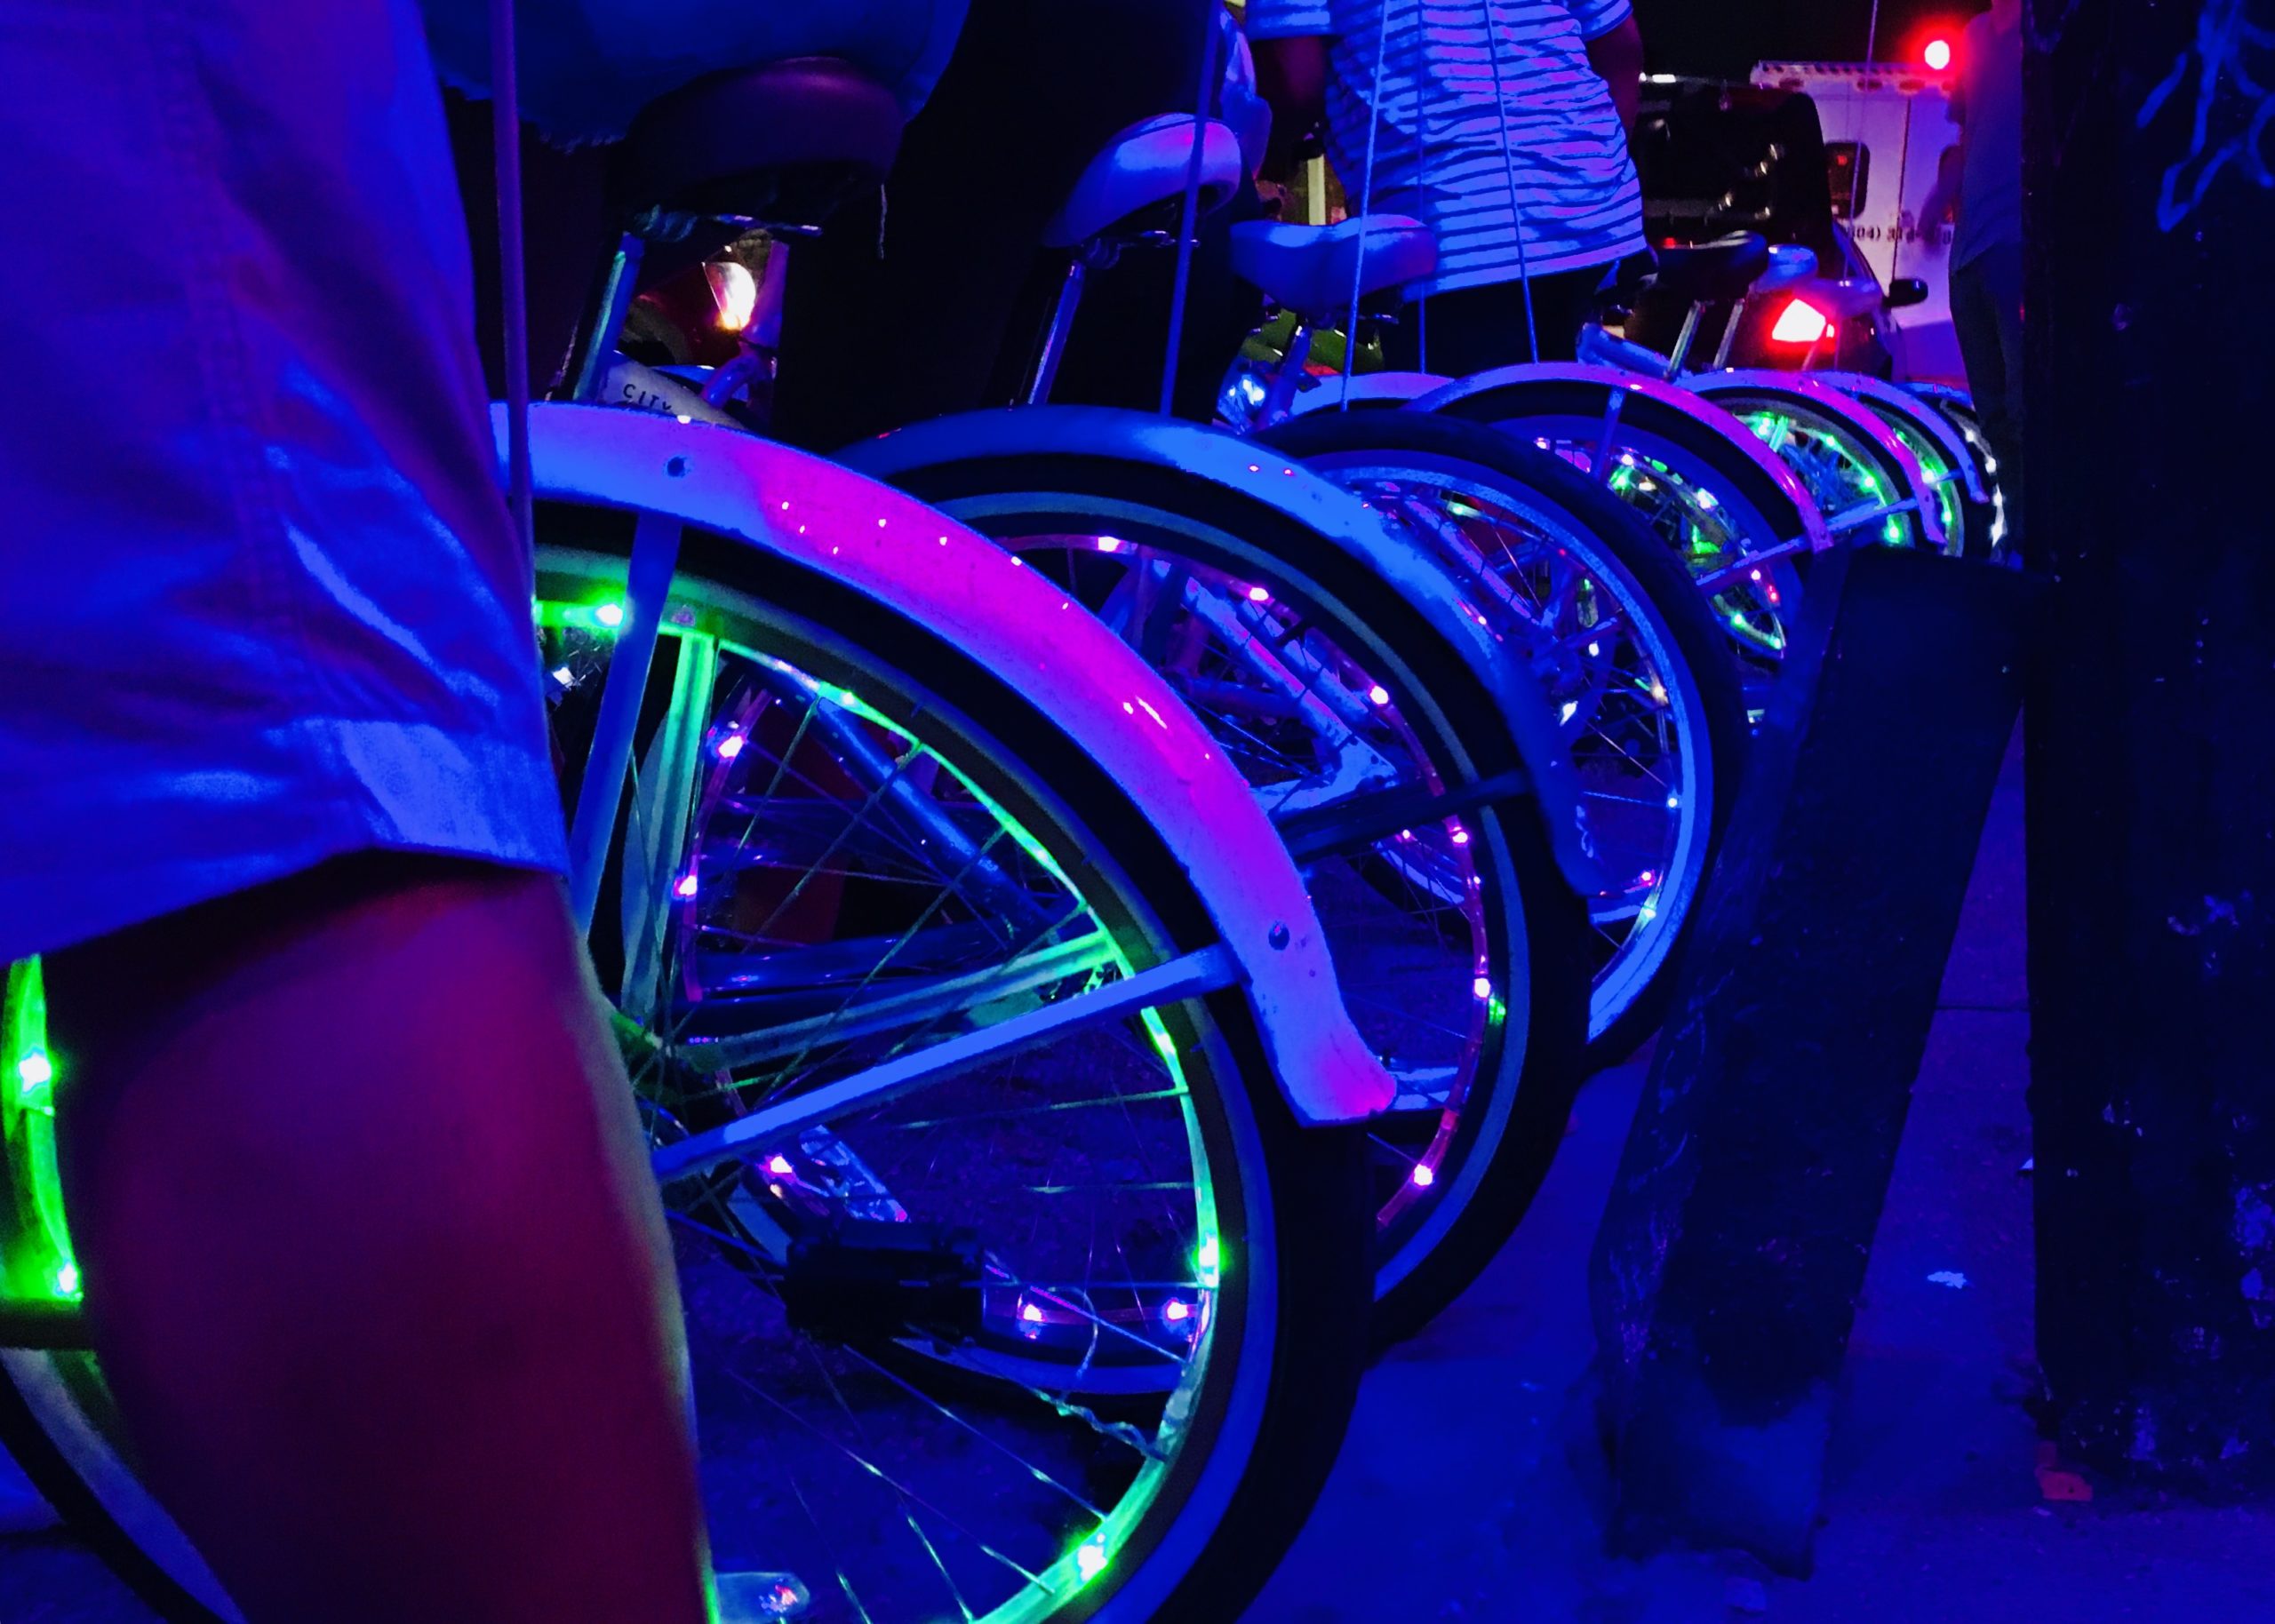 Riders use light-up bikes to cruise the Crescent City